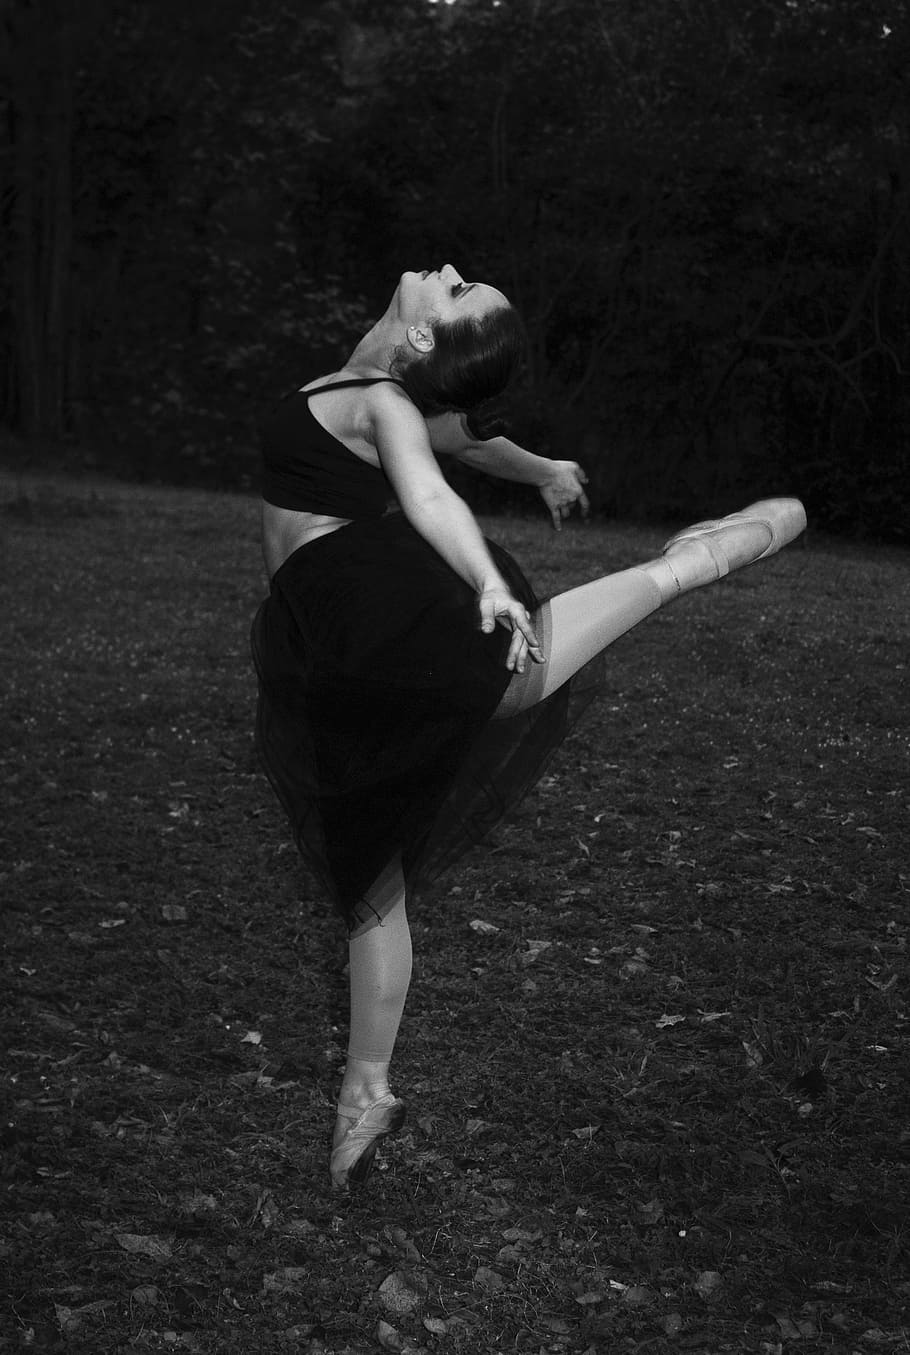 grayscale photography, woman dancing ballet, ballerina, woman, ballet dancer, pointe shoes, art, dance, outdoors, black And White